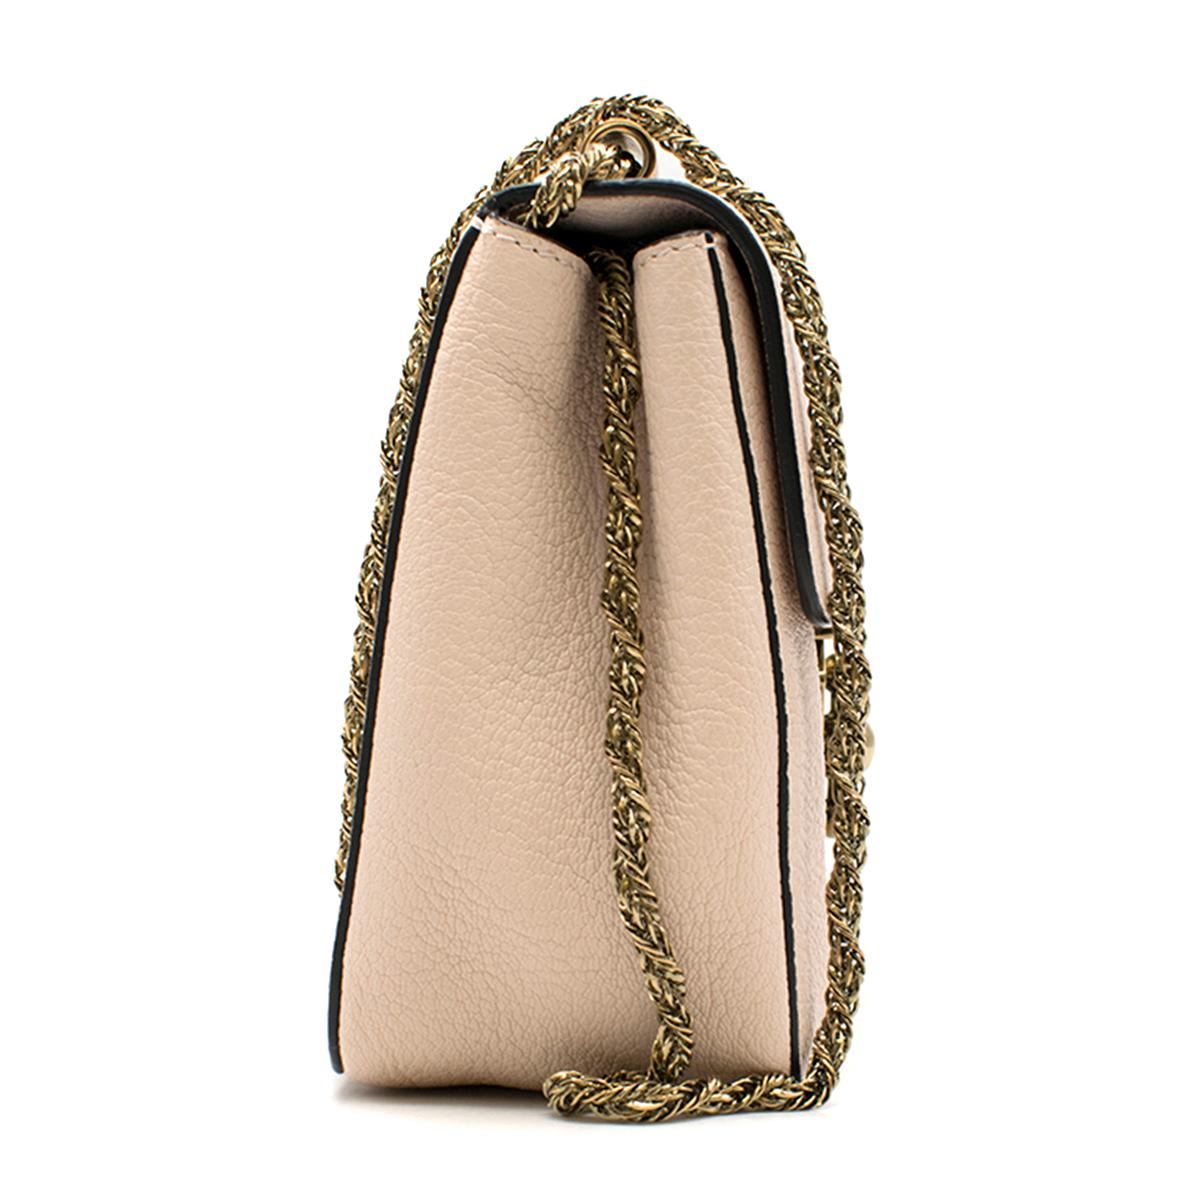 Chloe Elsie Leather Crossbody Bag

- Nude pink grained leather crossbody bag
- Front twist lock fastening with logo engraved
- Flap opening
- Internal soft leather lining
- Internal patch pocket
- Shoulder strap chain
- Gold-tone hardware
- This